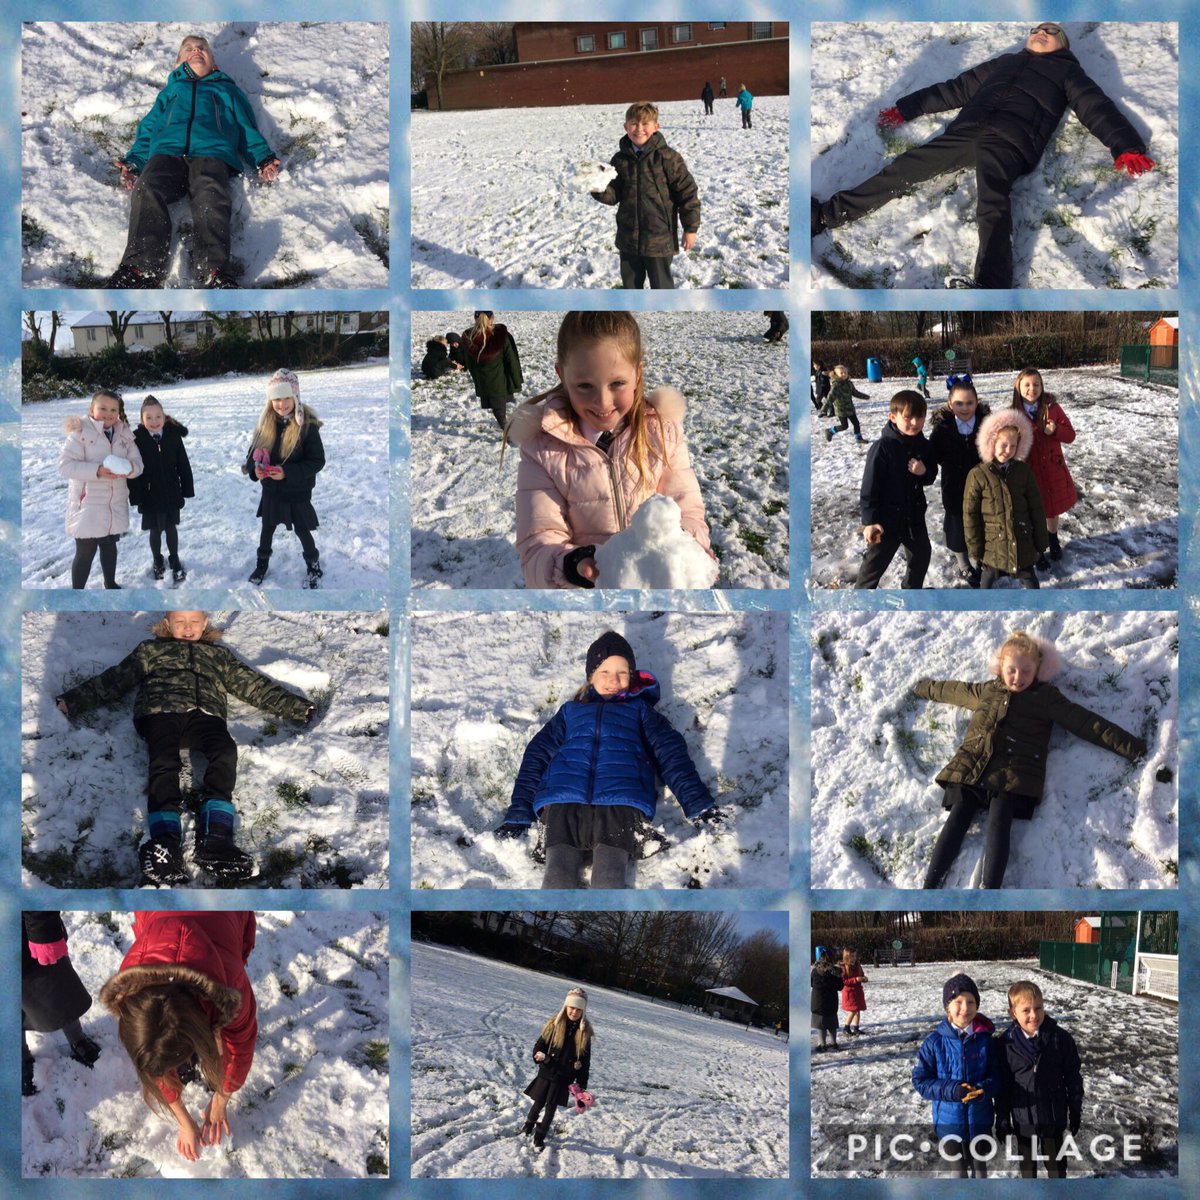 Loving the signs of Winter this half term! #managingrisks #funinthesnow #getactiveoutdoors 🥶 ❄️